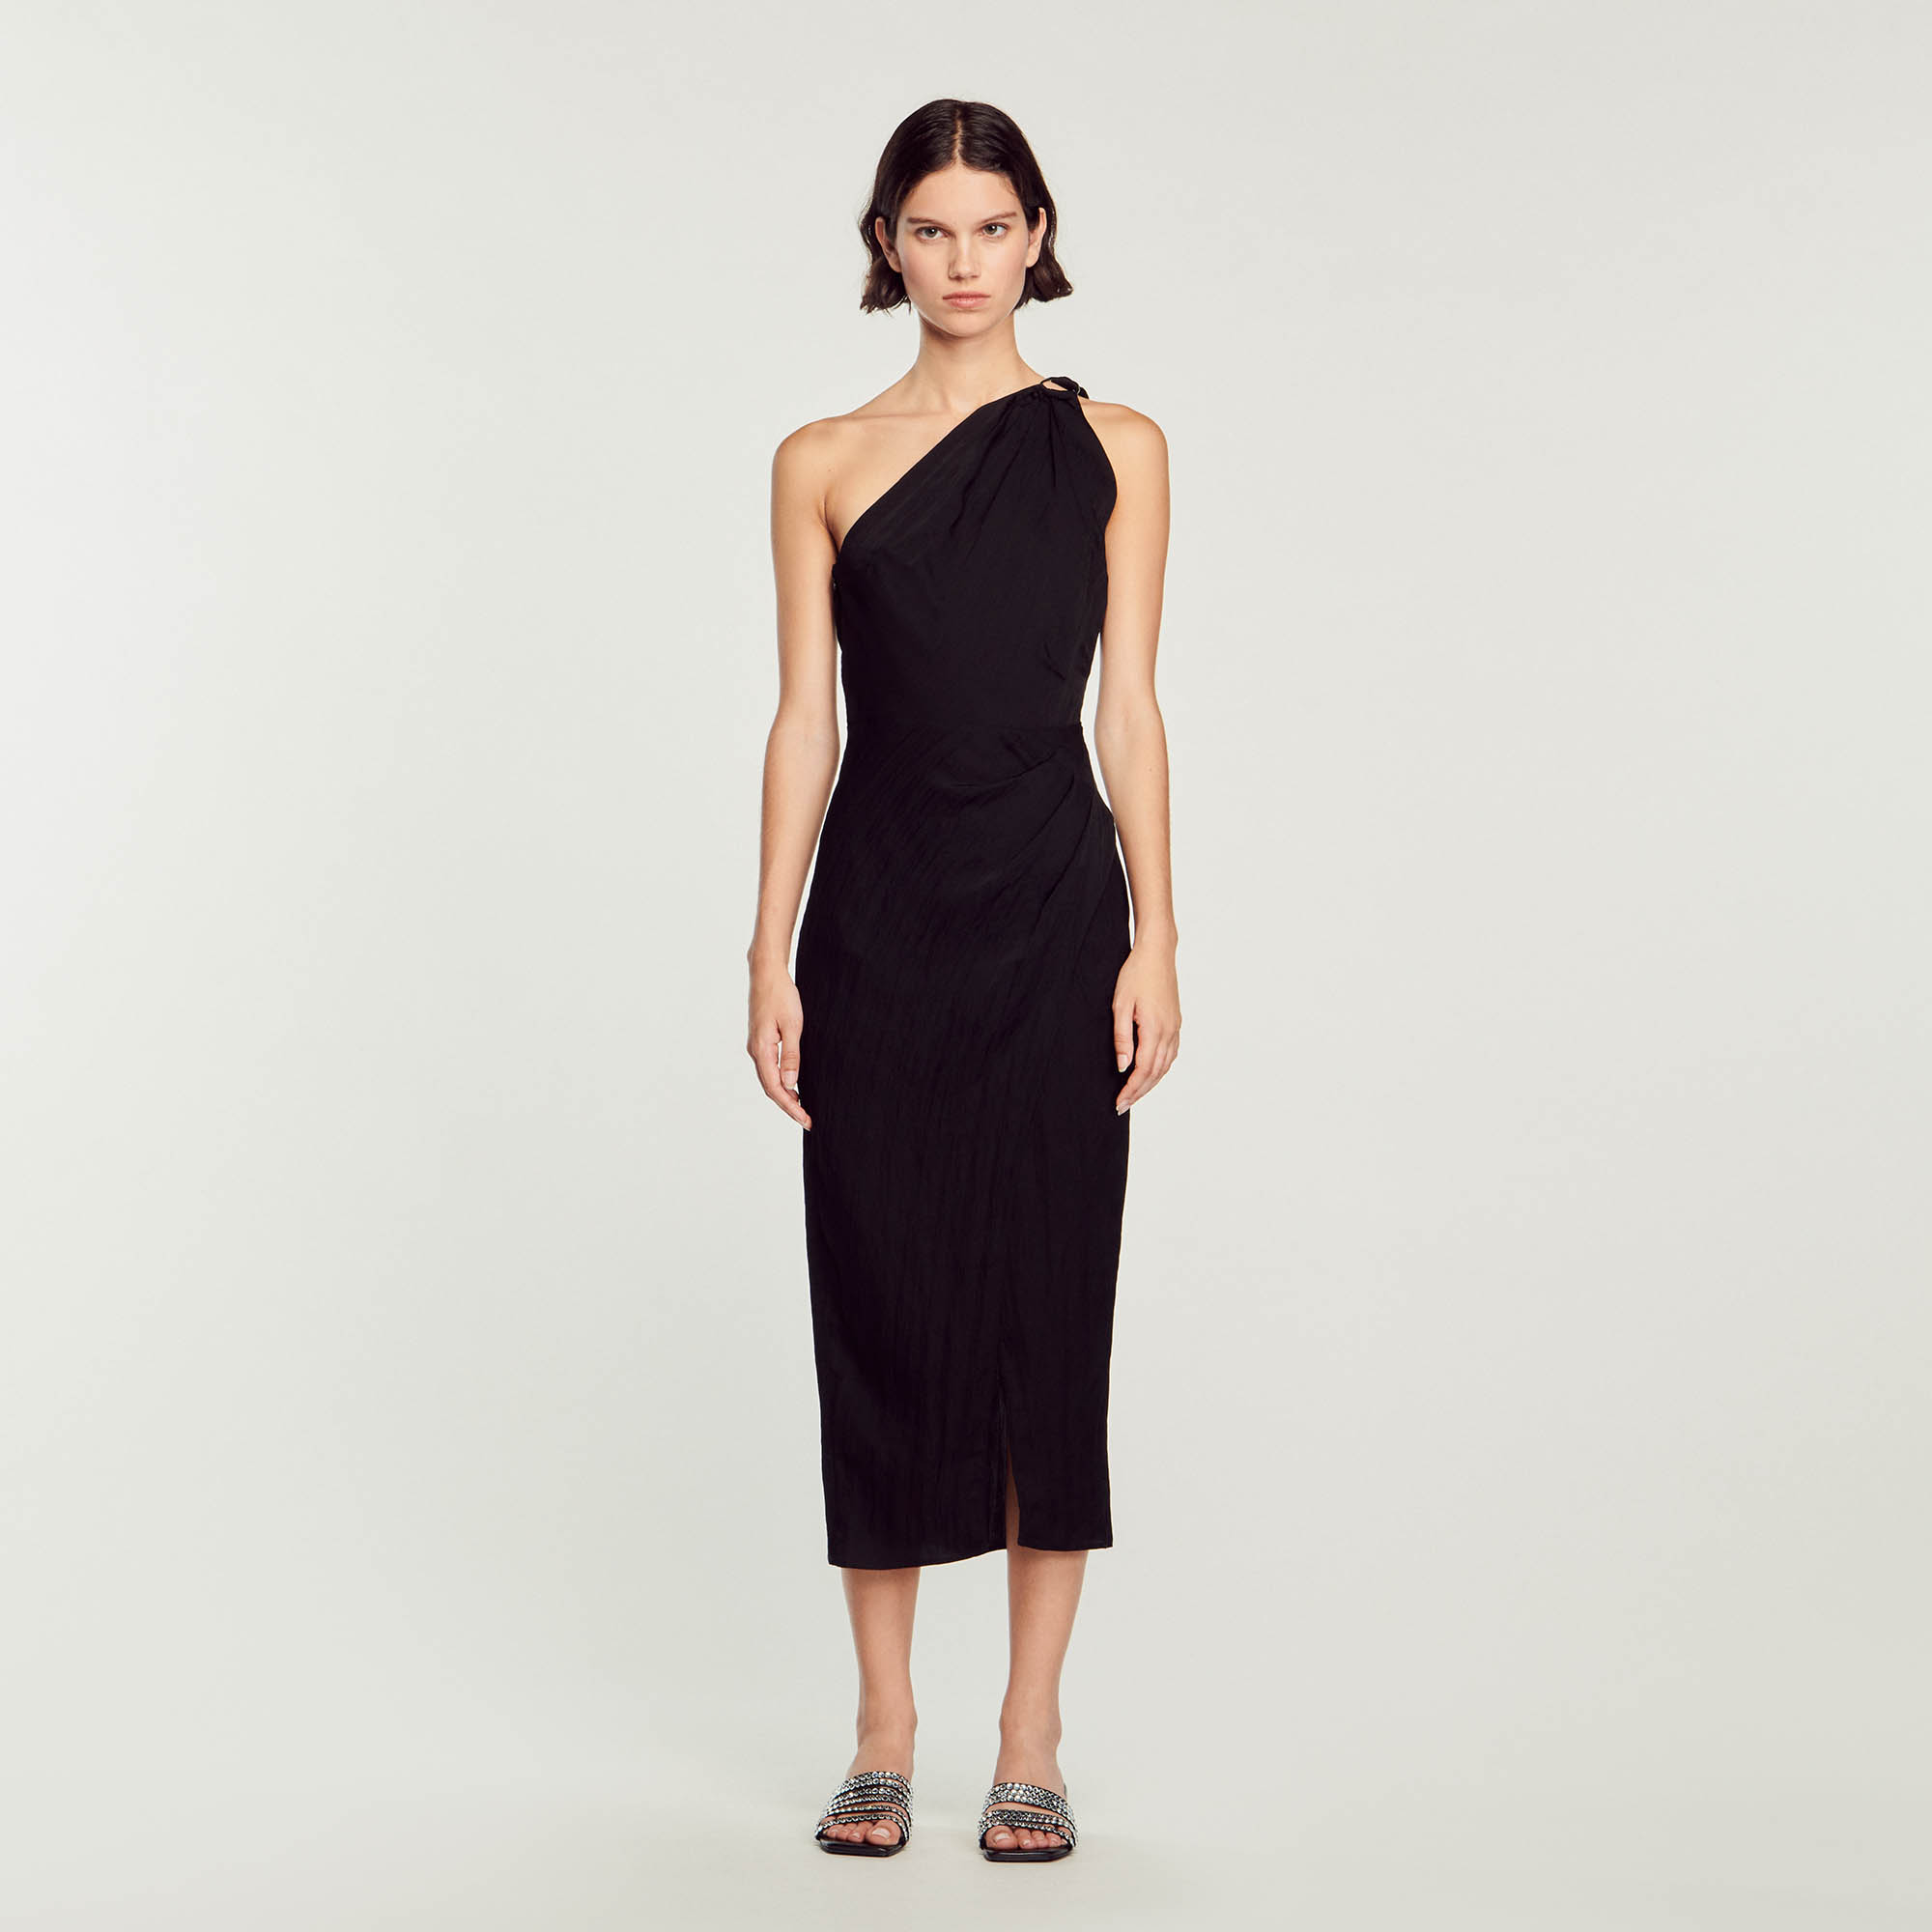 Sandro acetate Asymmetrical, draped midi dress, open front with buckle strap and opening at the back